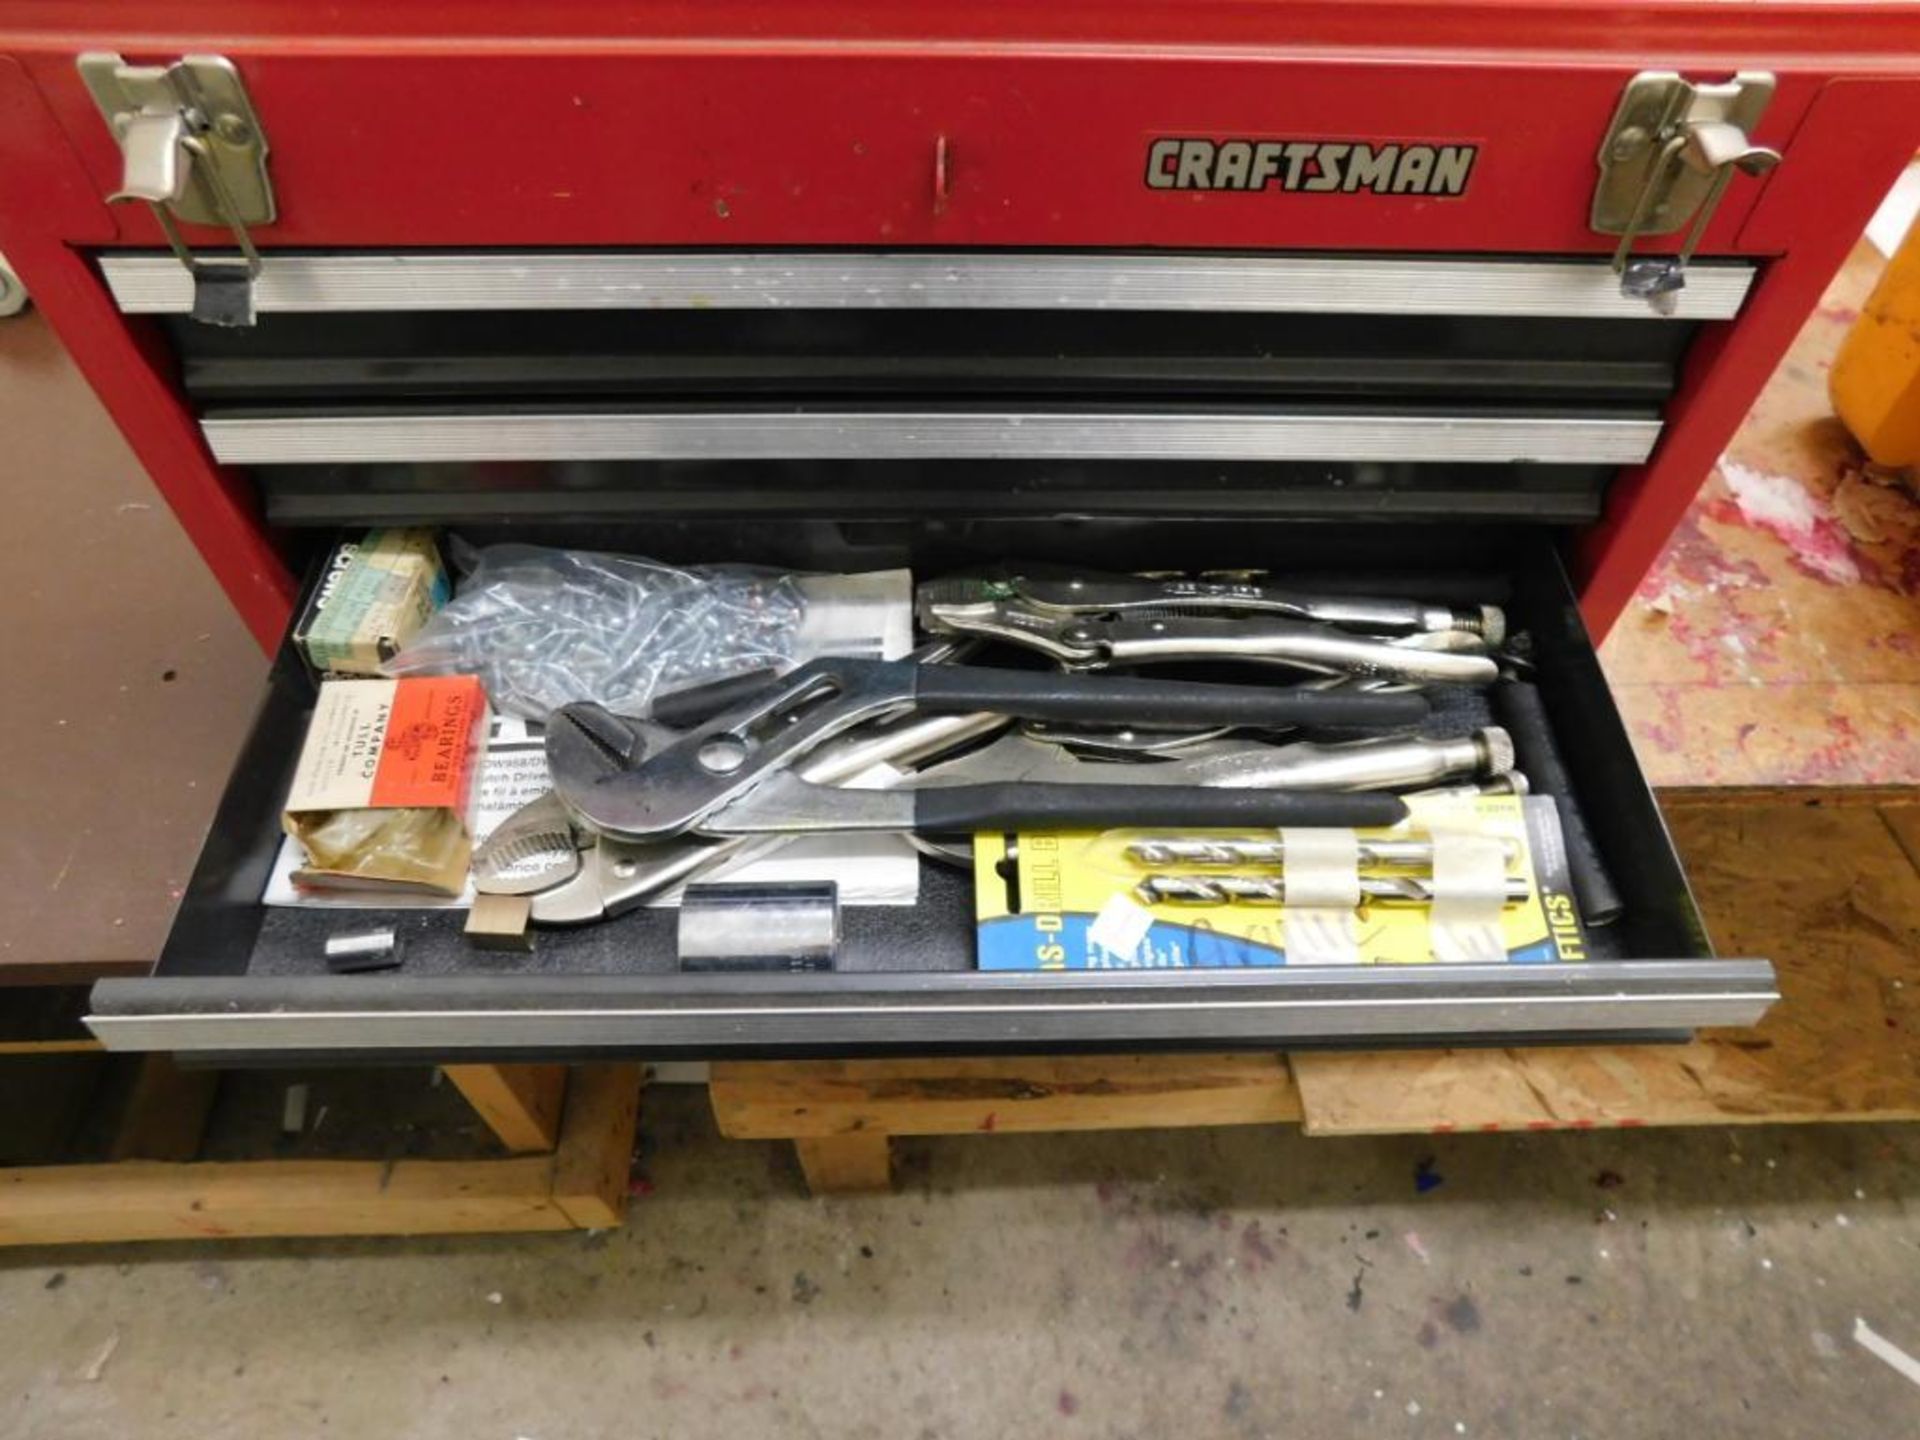 LOT: Craftsman 3-Drawer Tool Box with Top Storage, with Contents (LOCATED IN ST. AUGUSTA, MN.) - Image 4 of 4